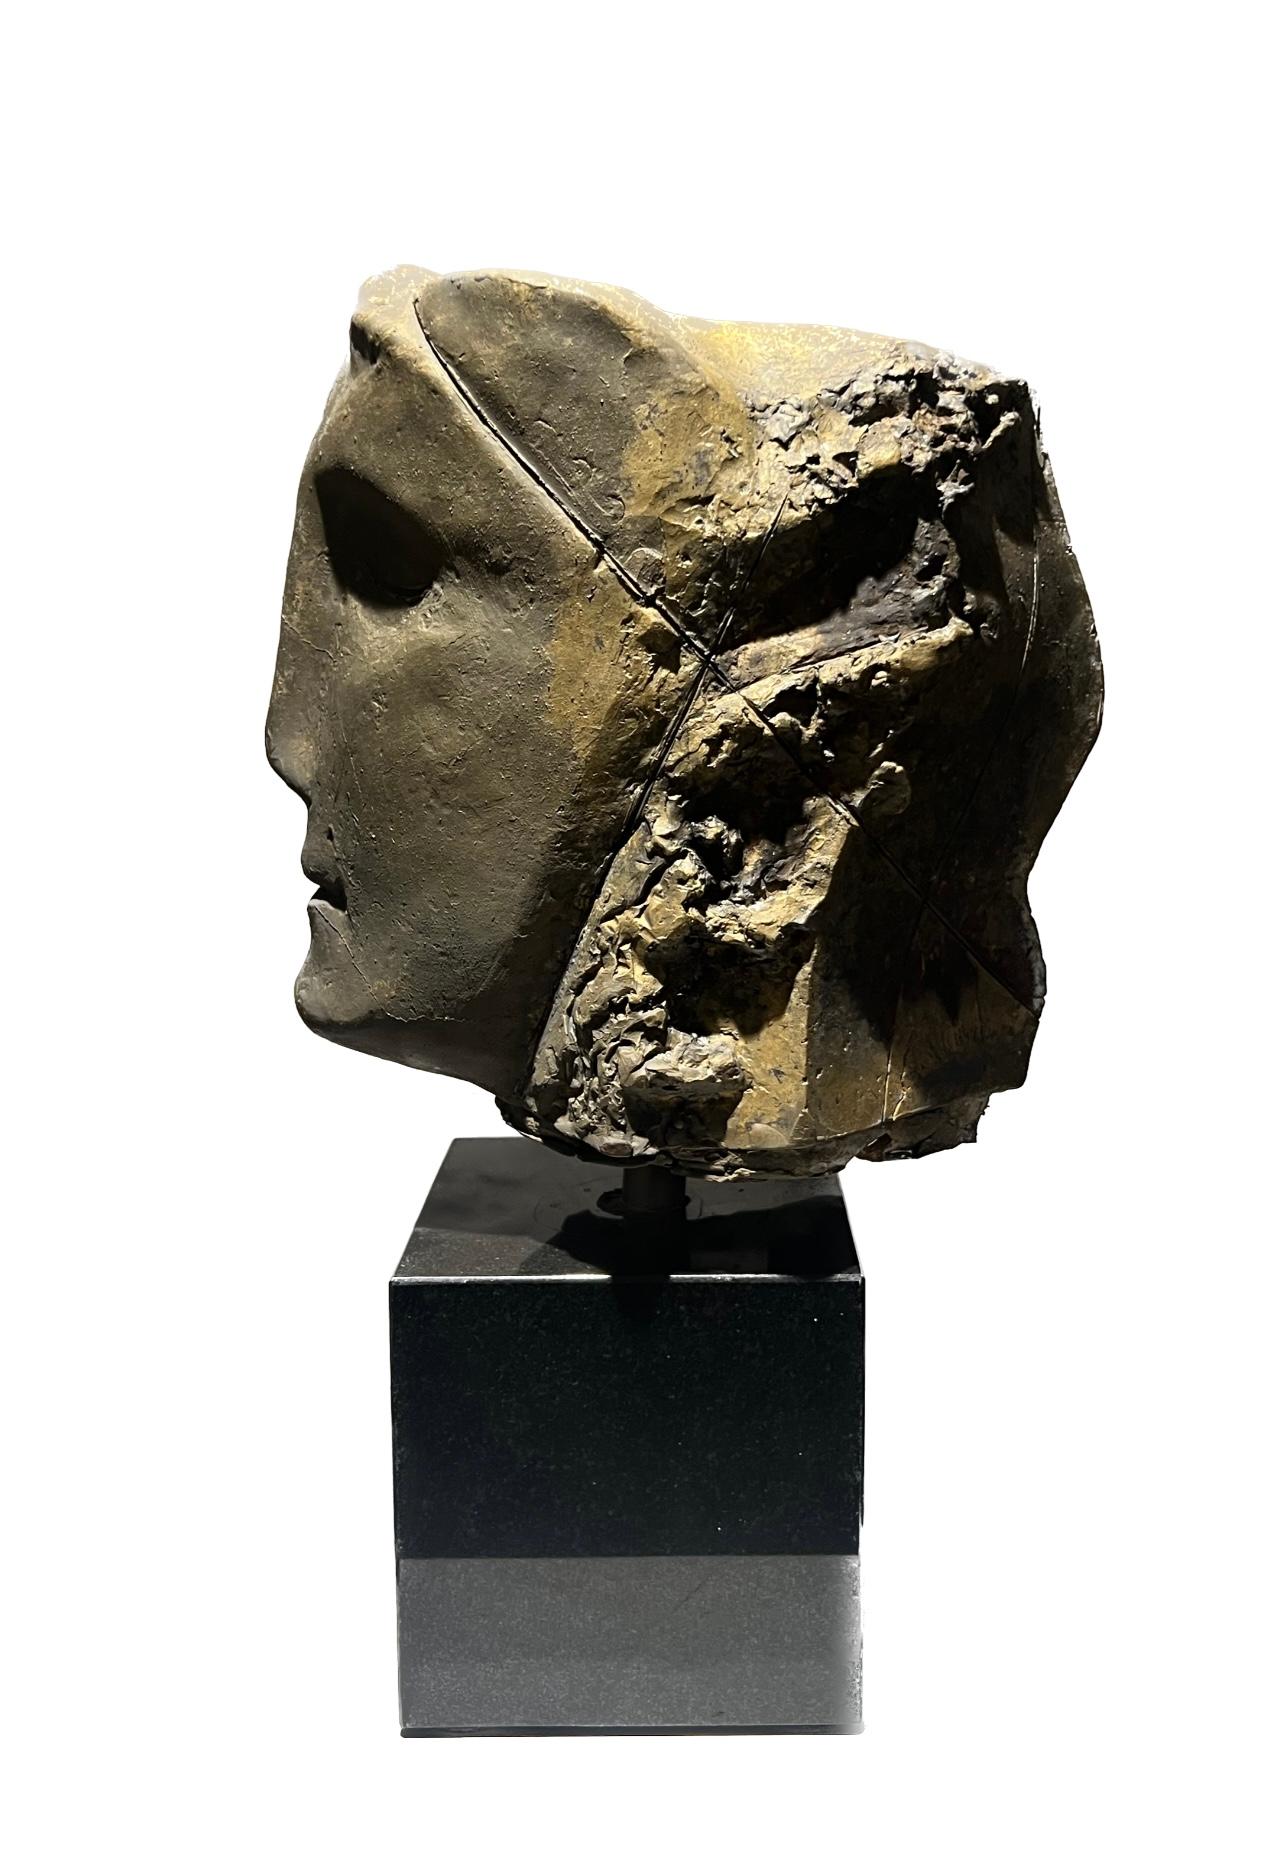 Thomas Junghans Figurative Sculpture - Prima Luce Retouched Figurative Abstract Bronze Sculpture Limited Edition